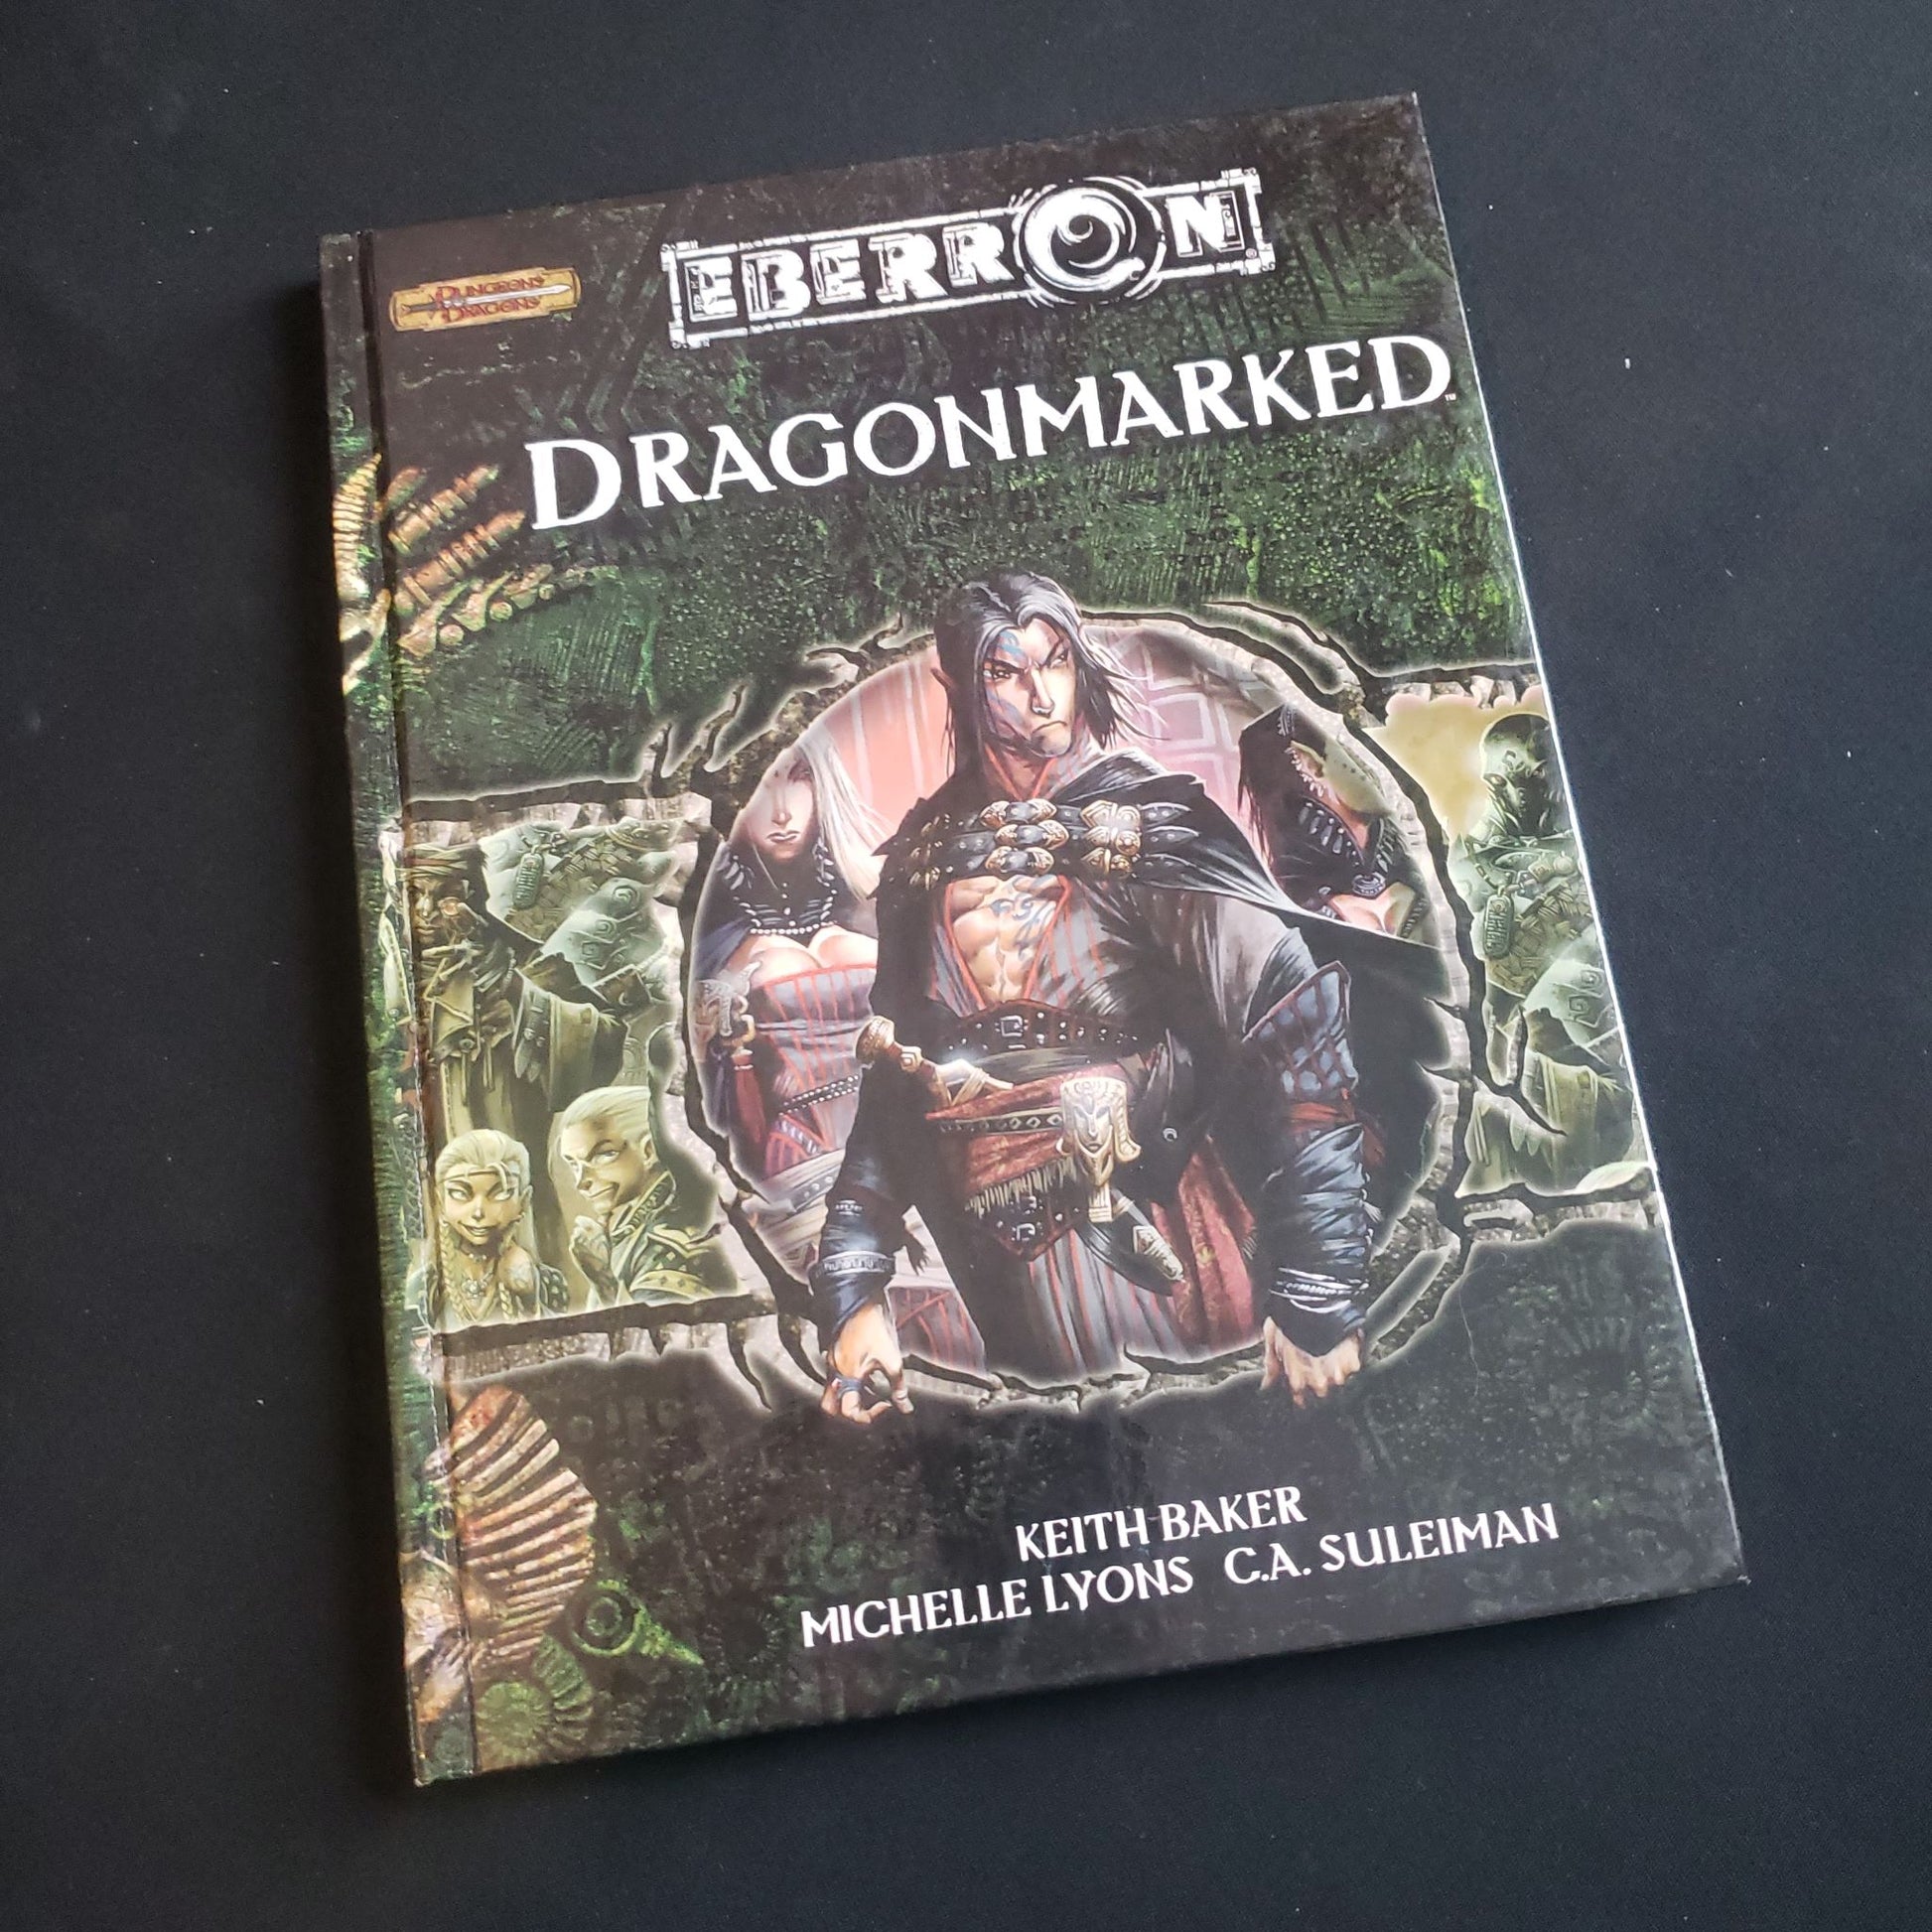 Front cover of the Eberron: Dragonmarked book for the Dungeons and Dragons roleplaying game